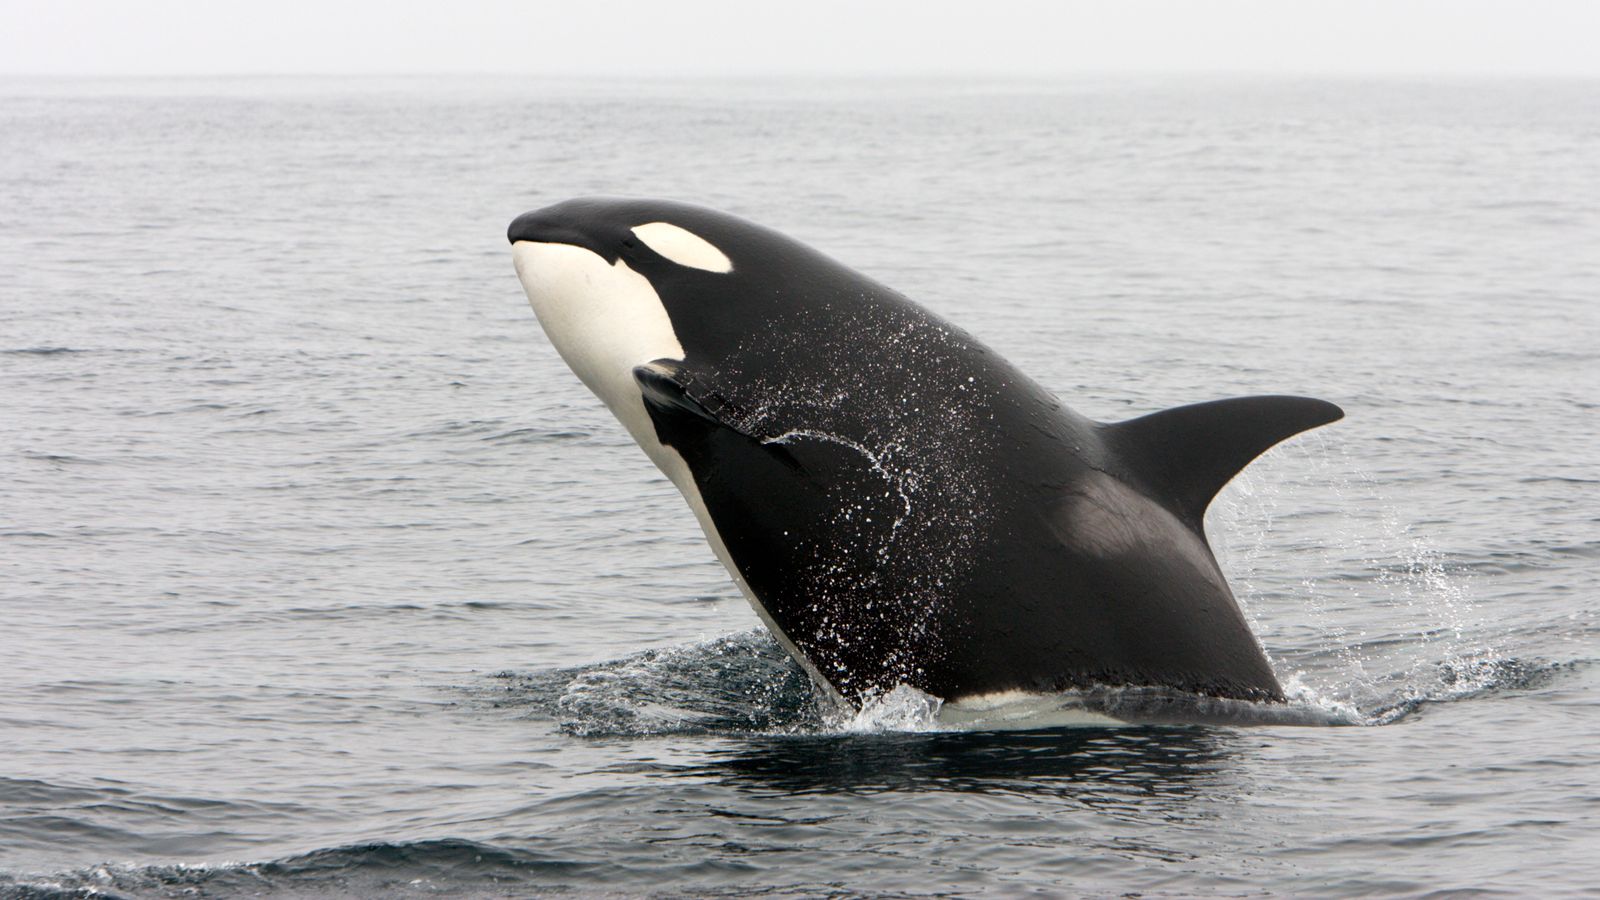 Killer whales deliberately hitting boats off coast of Spain and Portugal